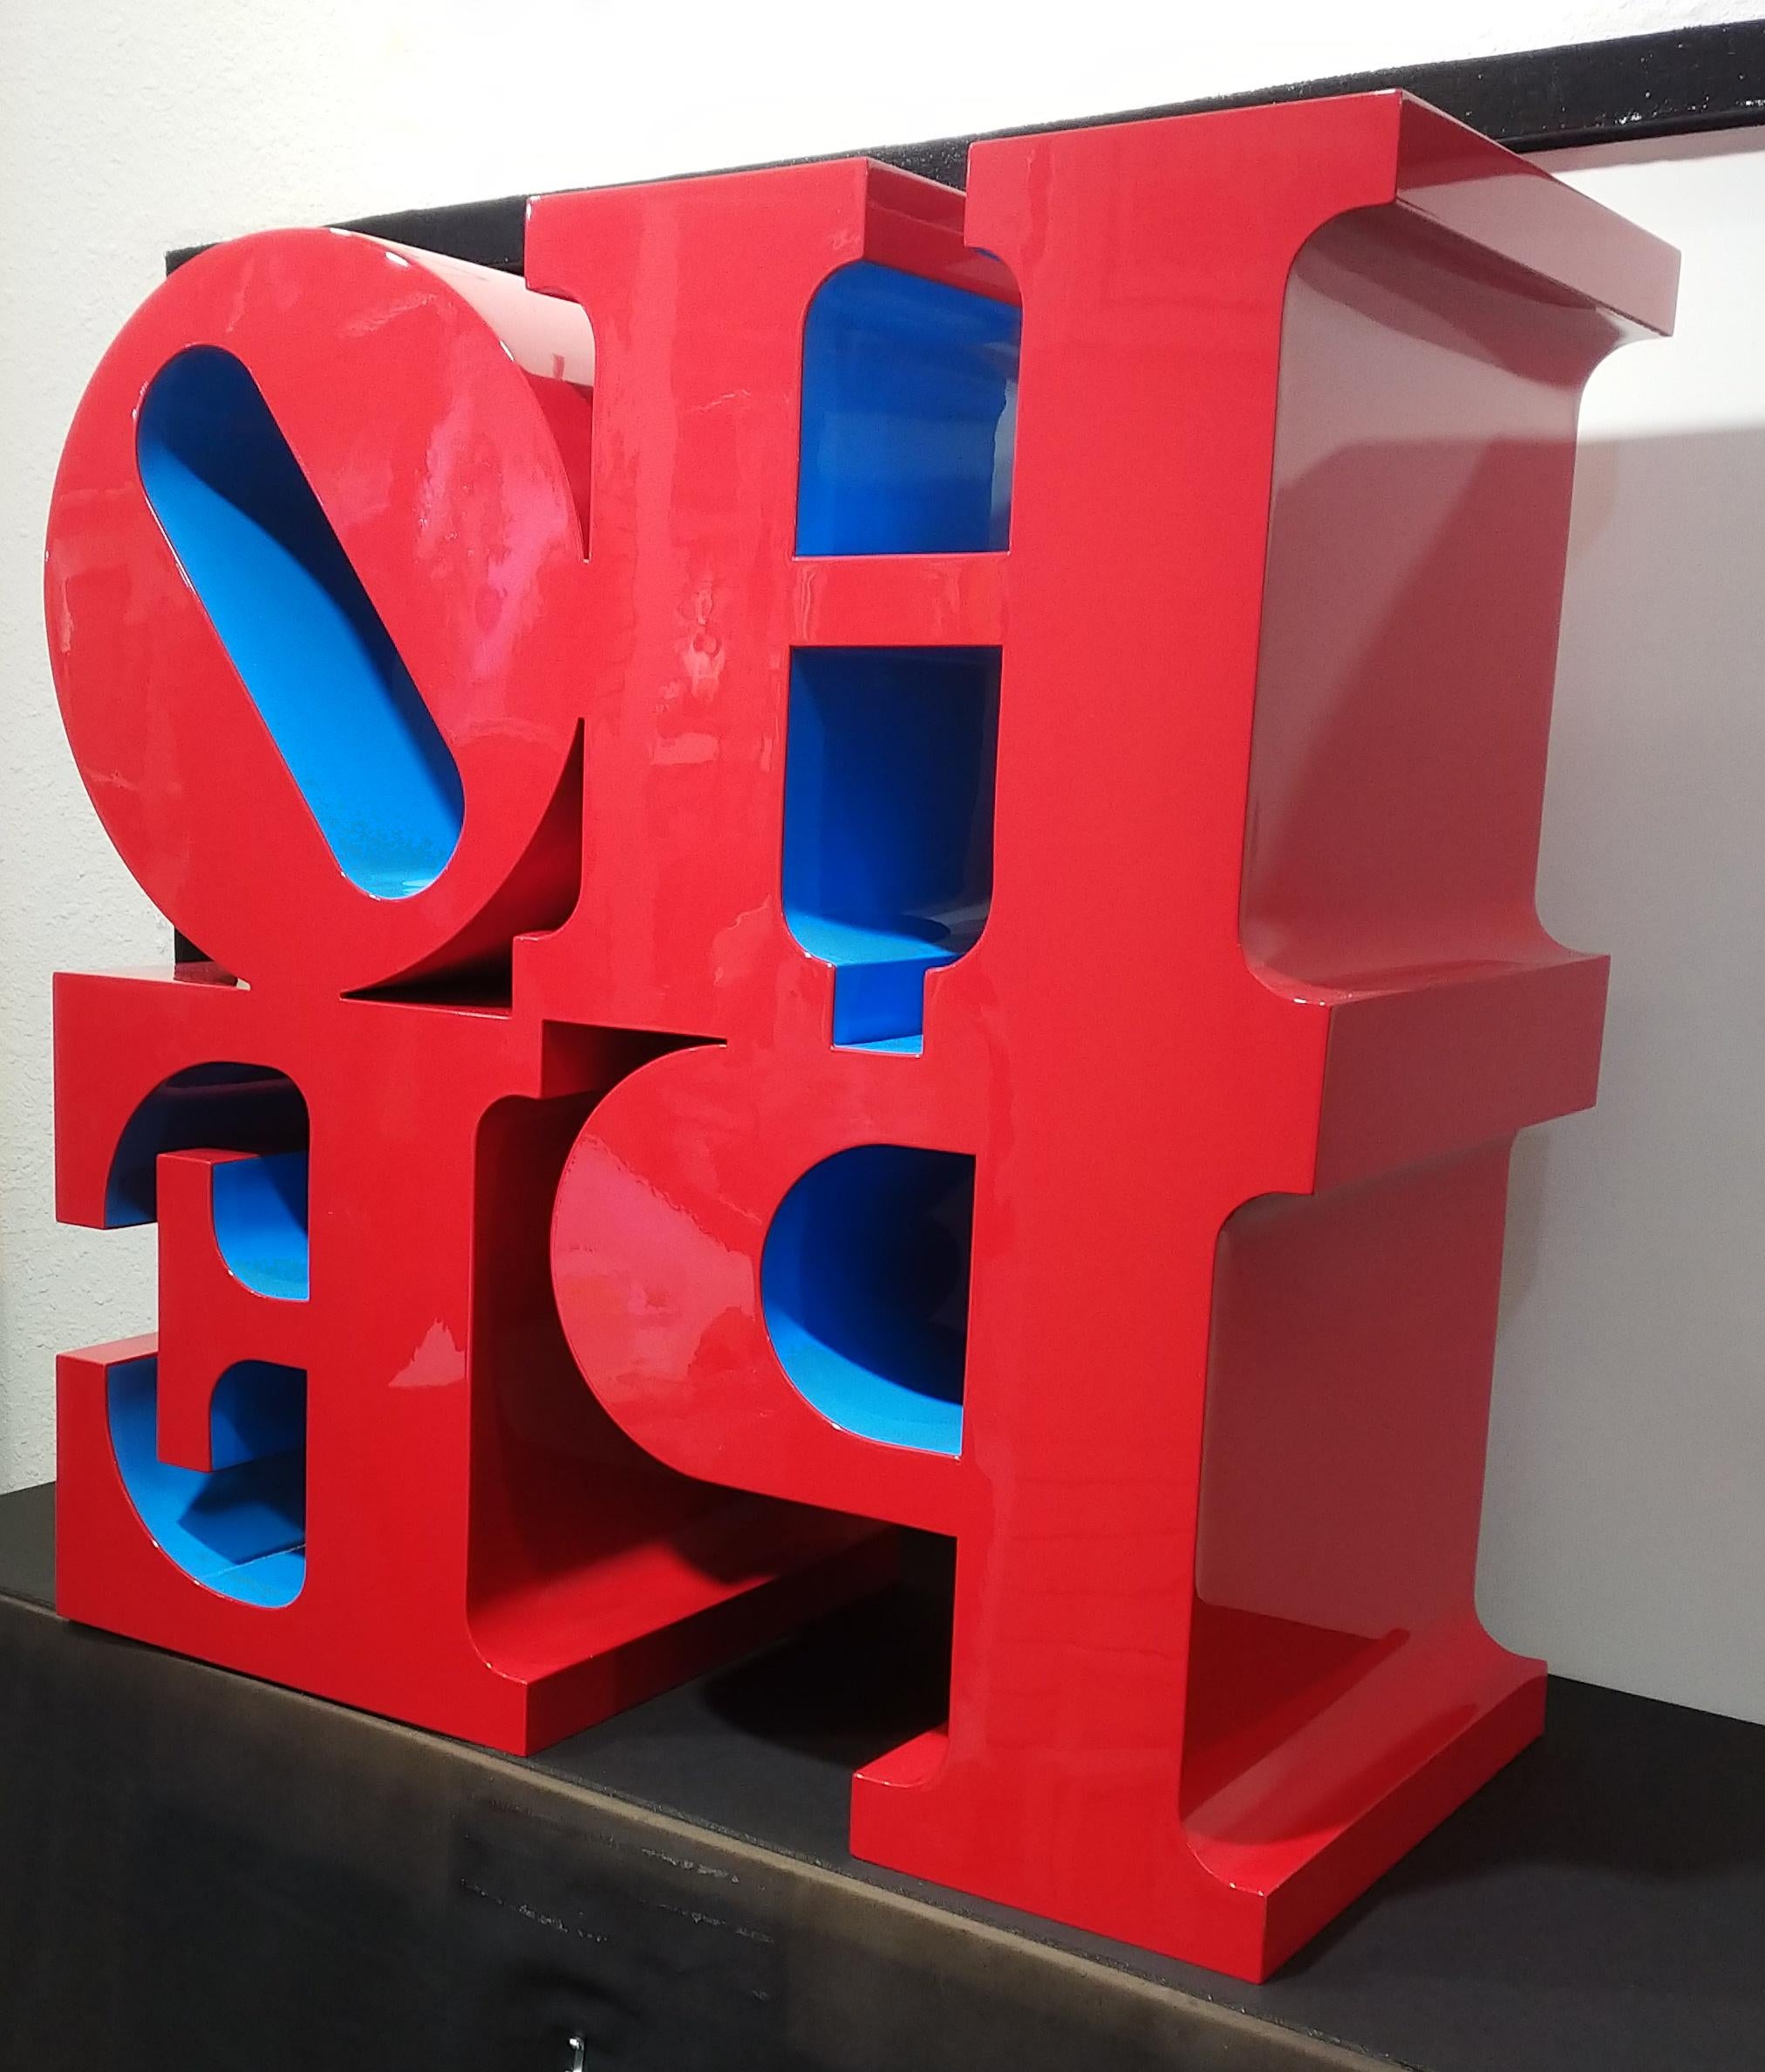 Painted aluminum sculpture.   Measures 36 x 36 x 18 inches.   Stamped 'R. Indiana' with edition and date.  Edition VIII/VIII.

Artwork is in excellent condition.  All reasonable offers will be considered.


About the Artist: Robert Indiana